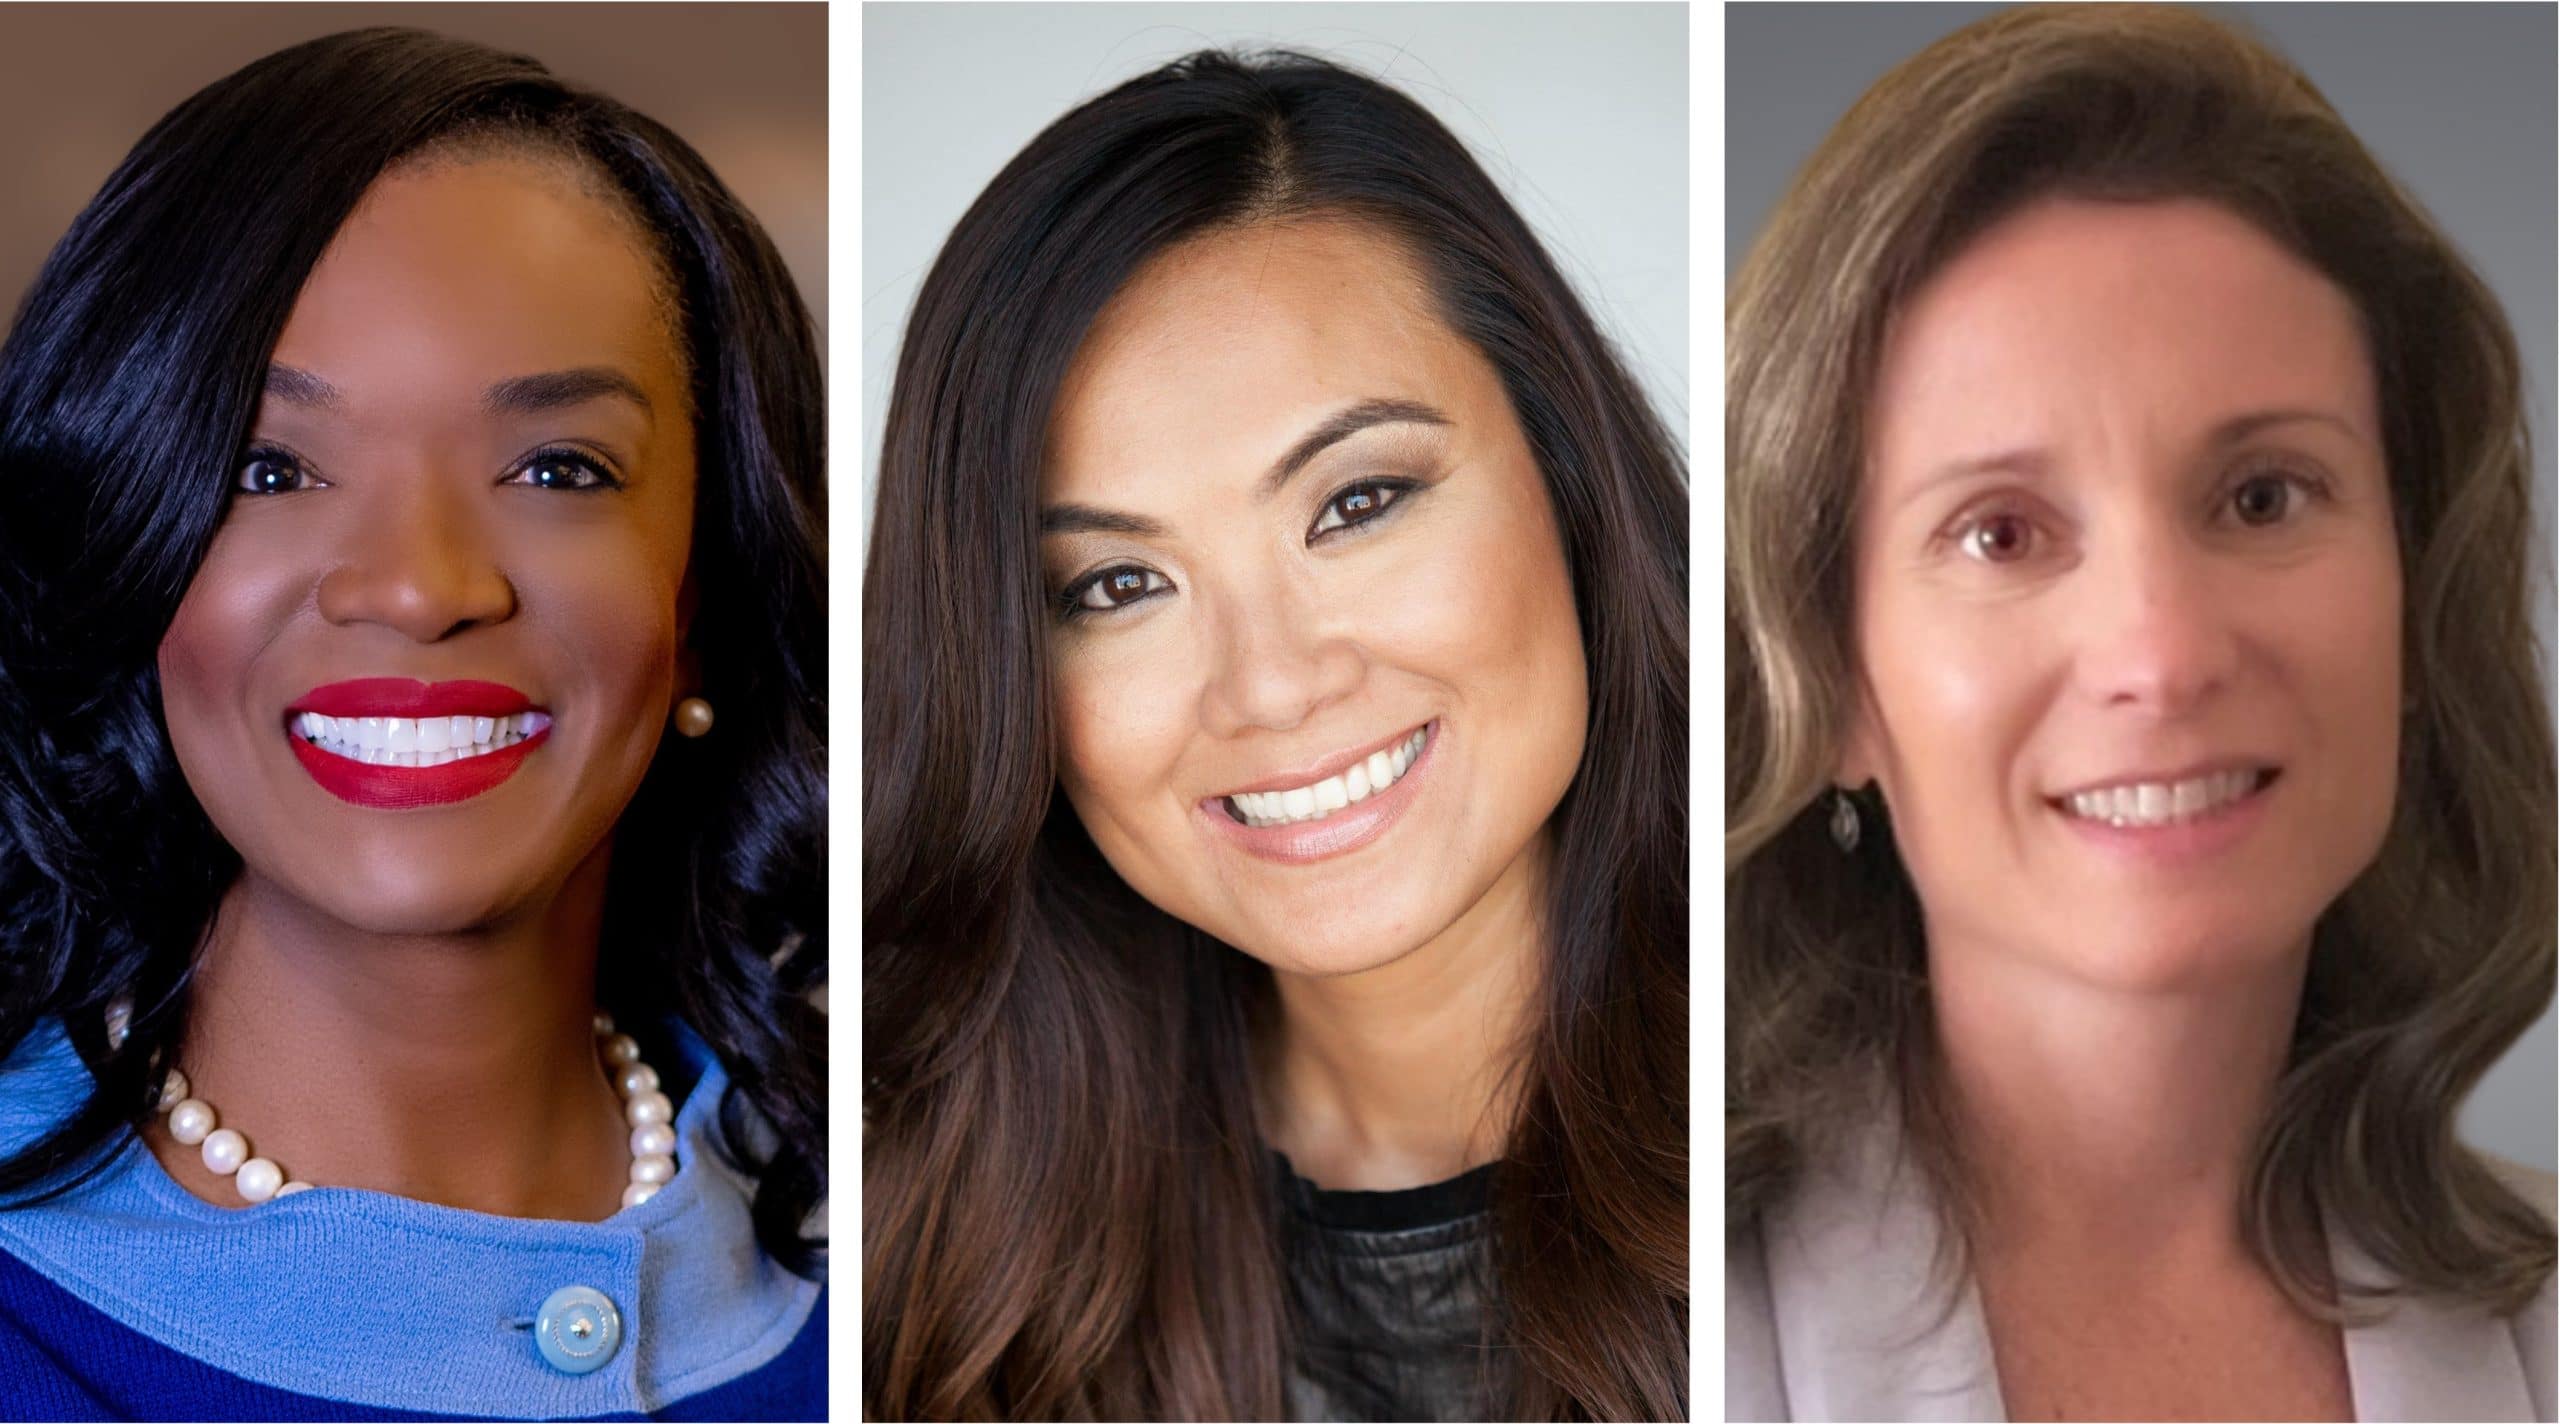 The Top 25 Women Leaders in Medical Devices of 2022